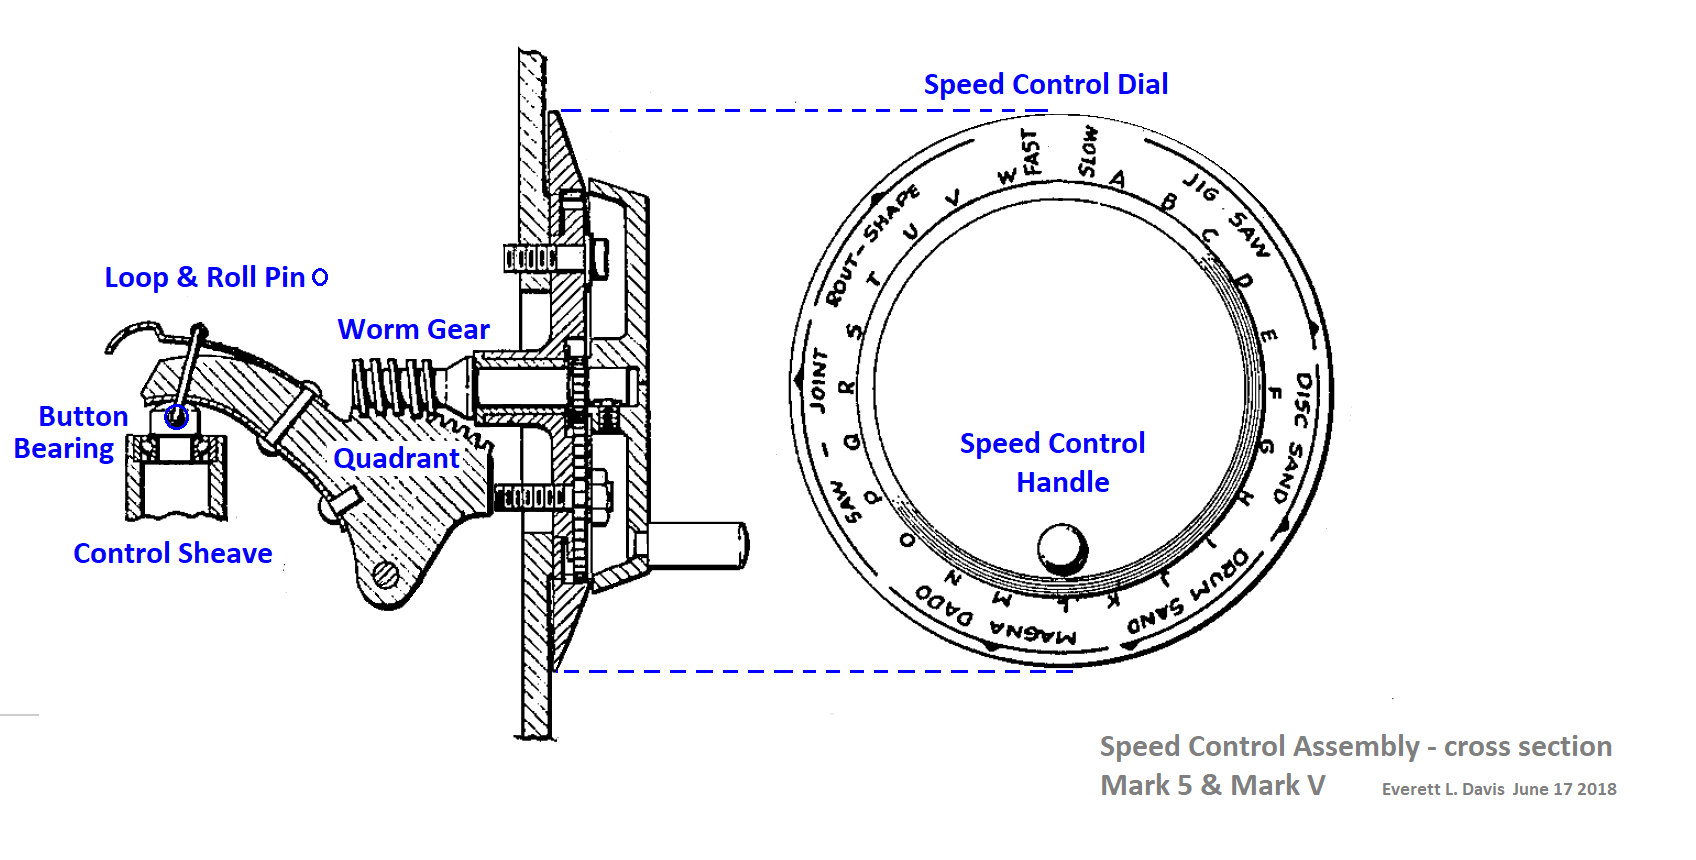 How The Speed Control Dial Manipulates The Control Sheave.png